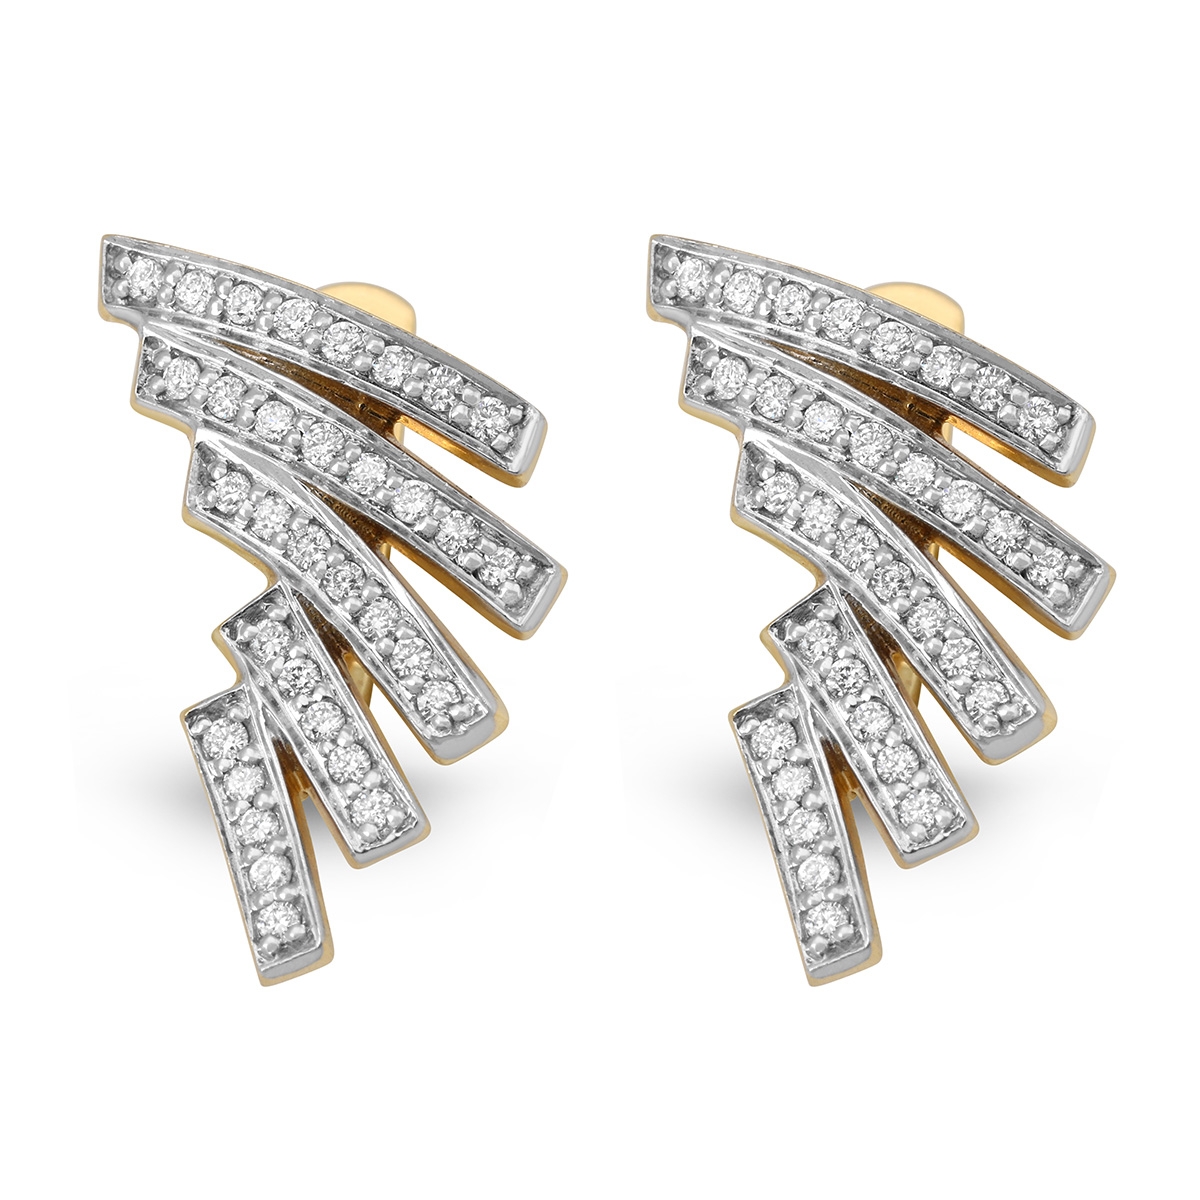 Anbinder Jewelry 14K Gold Ray of Light Earrings with Diamonds - 1